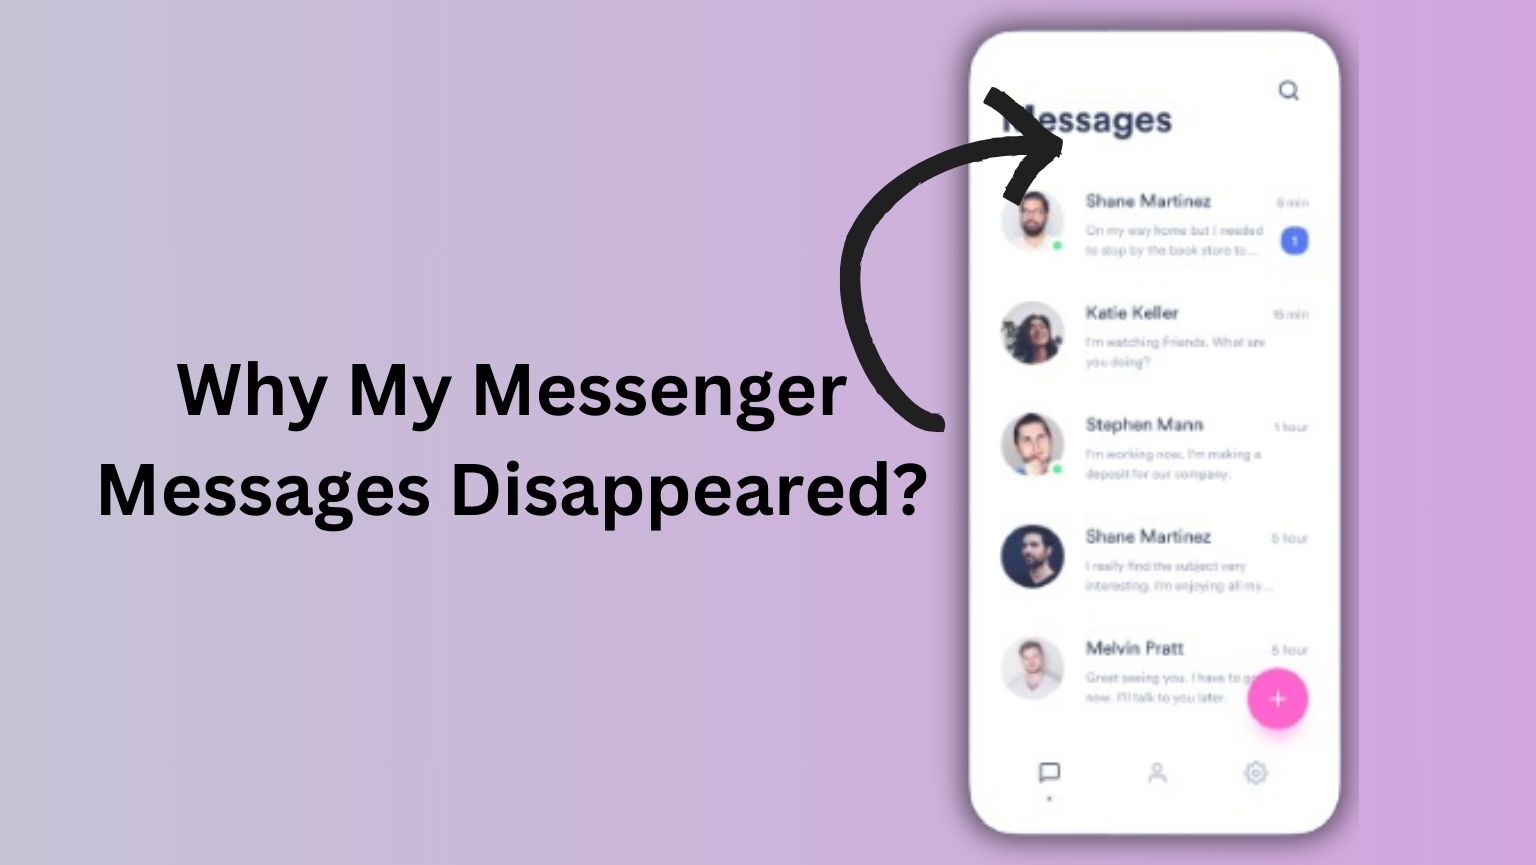 Messanger Messages Featured Image